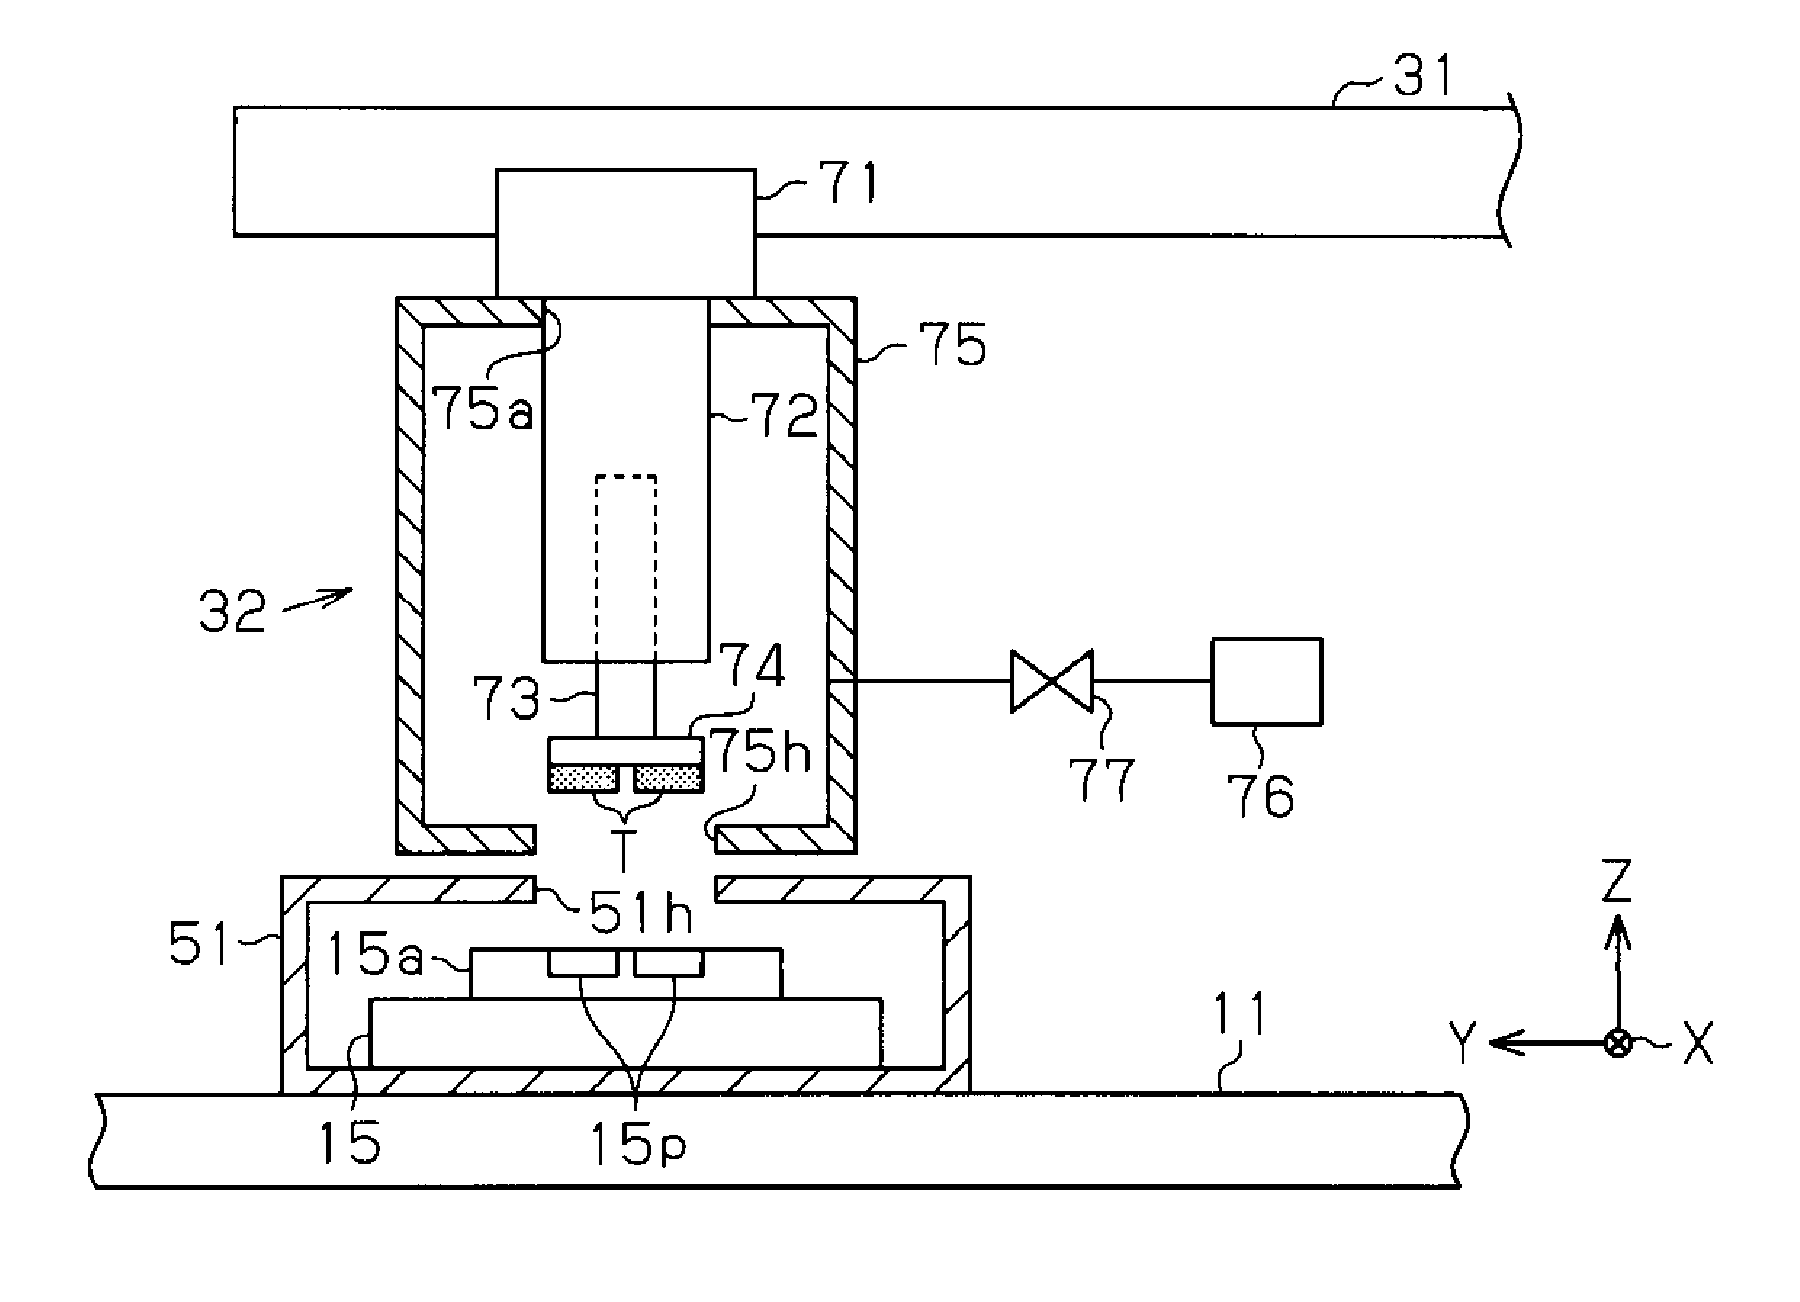 Part inspection apparatus and handler